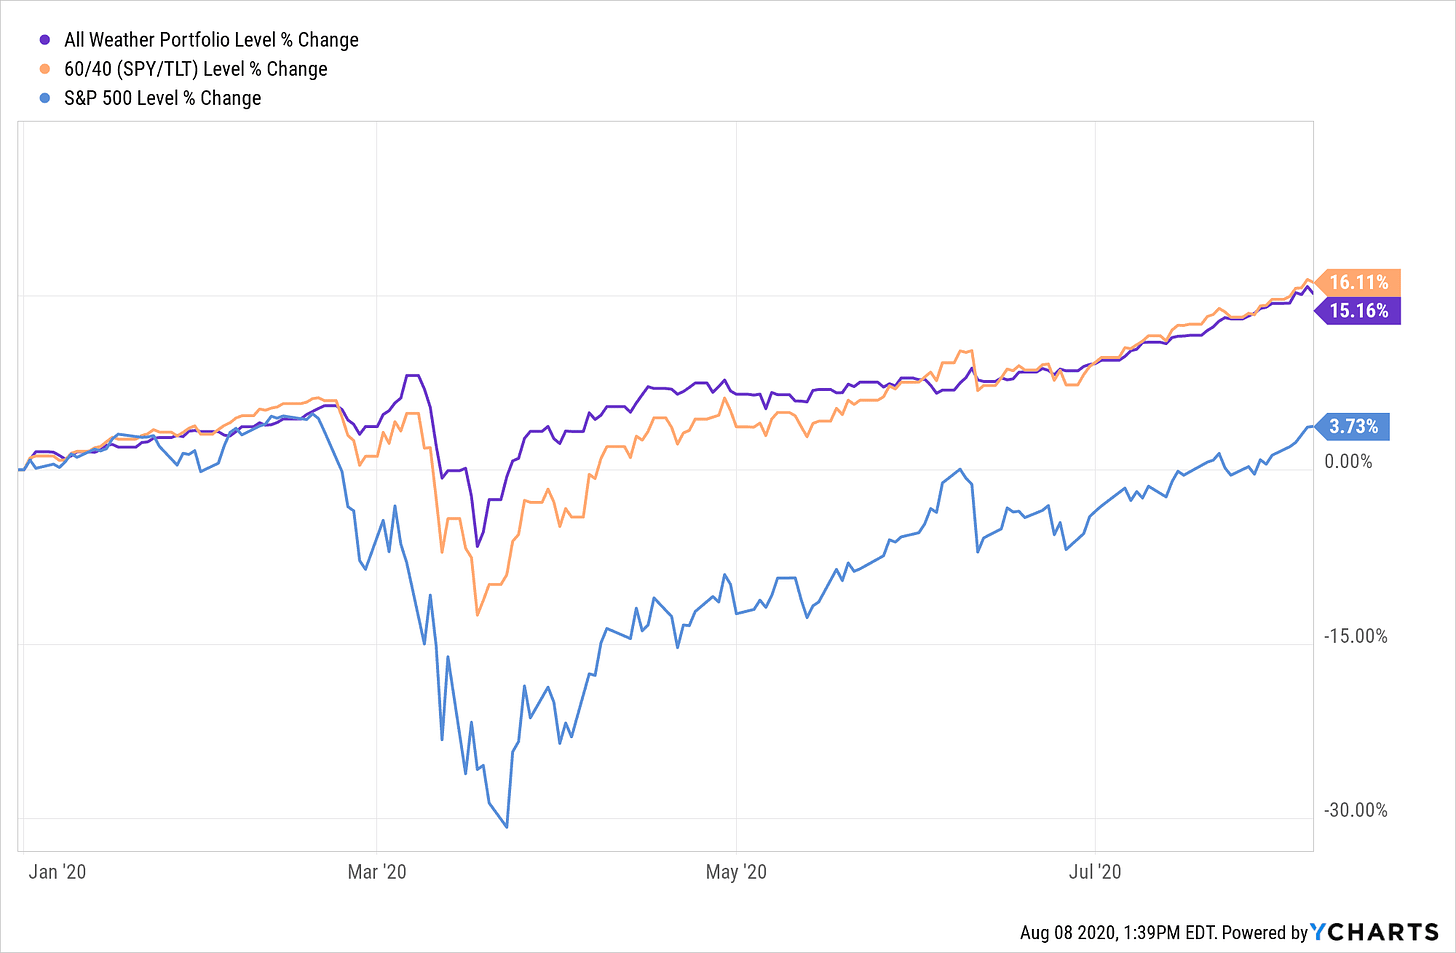 All Weather Portfolio vs a 60/40 and the S&P 500 during the COVID-19 crash of early 2020.